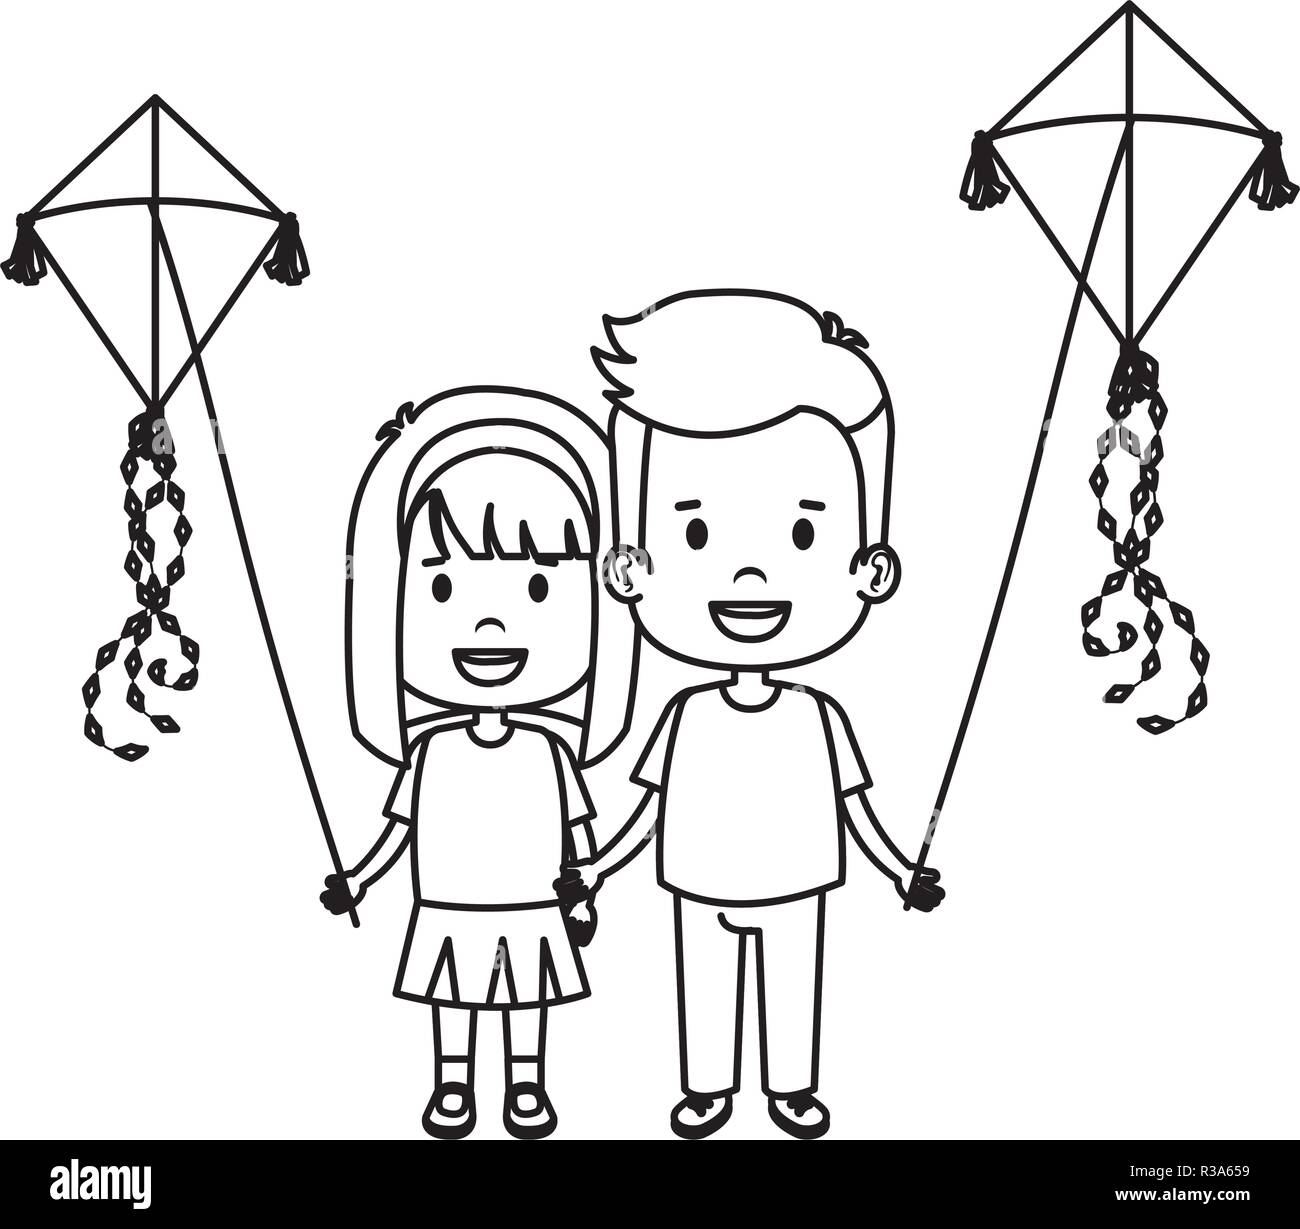 kids couple with kite flying Stock Vector